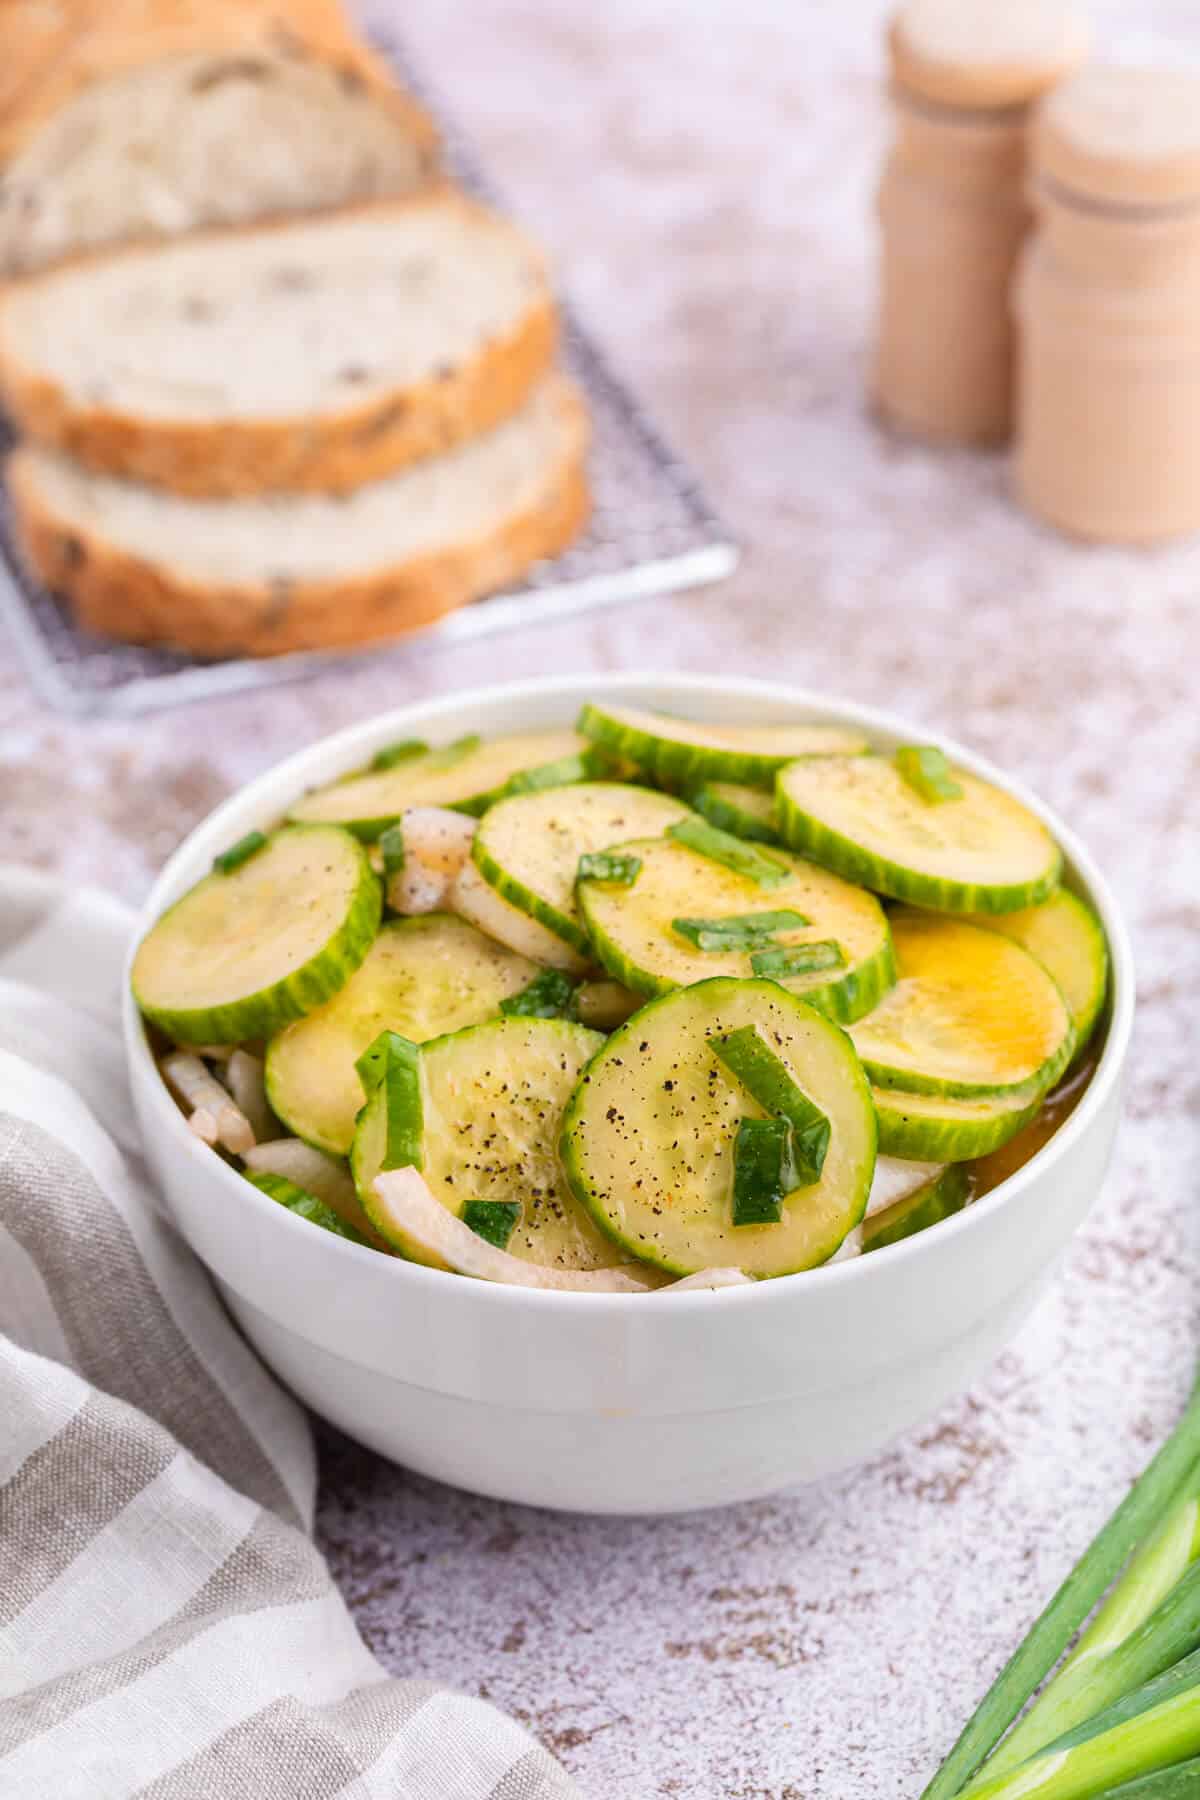 Cucumber salad in a white bowl.